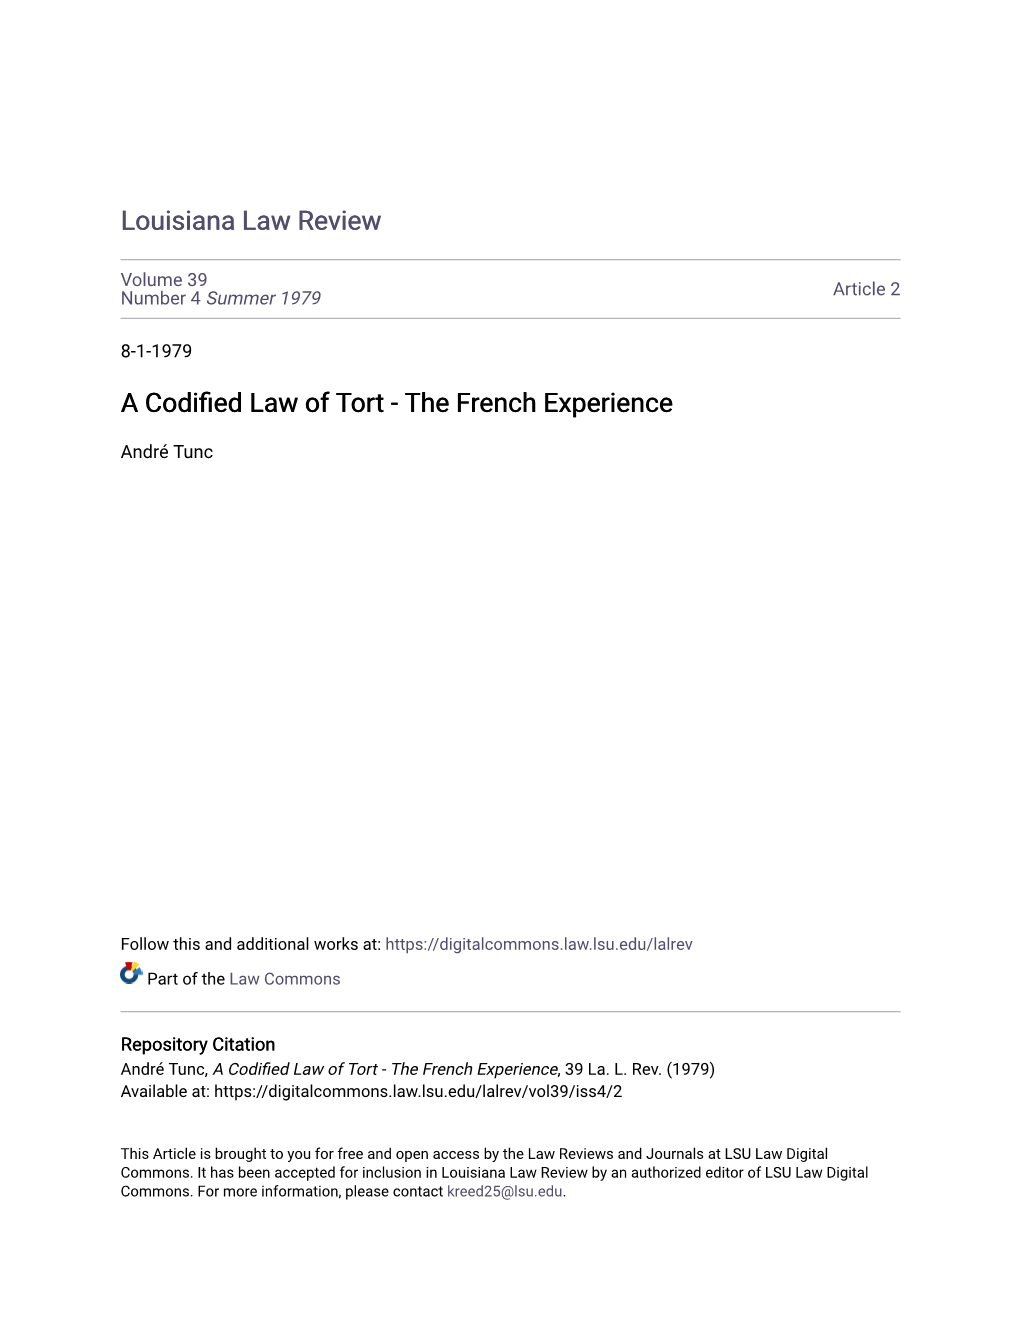 A Codified Law of Tort-The French Experience*